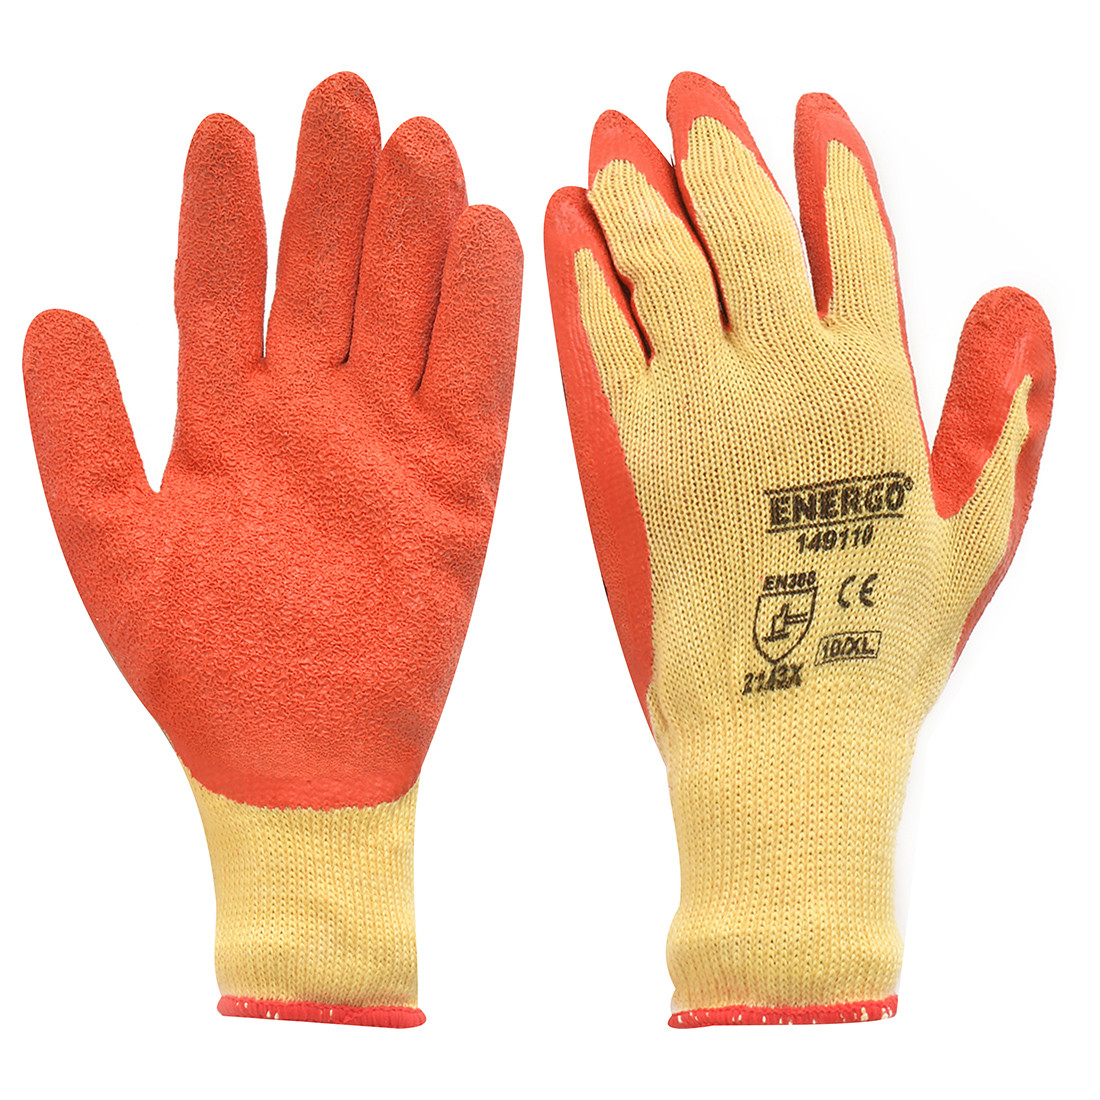 Latex Impregnated Knit Glove - Personal protection